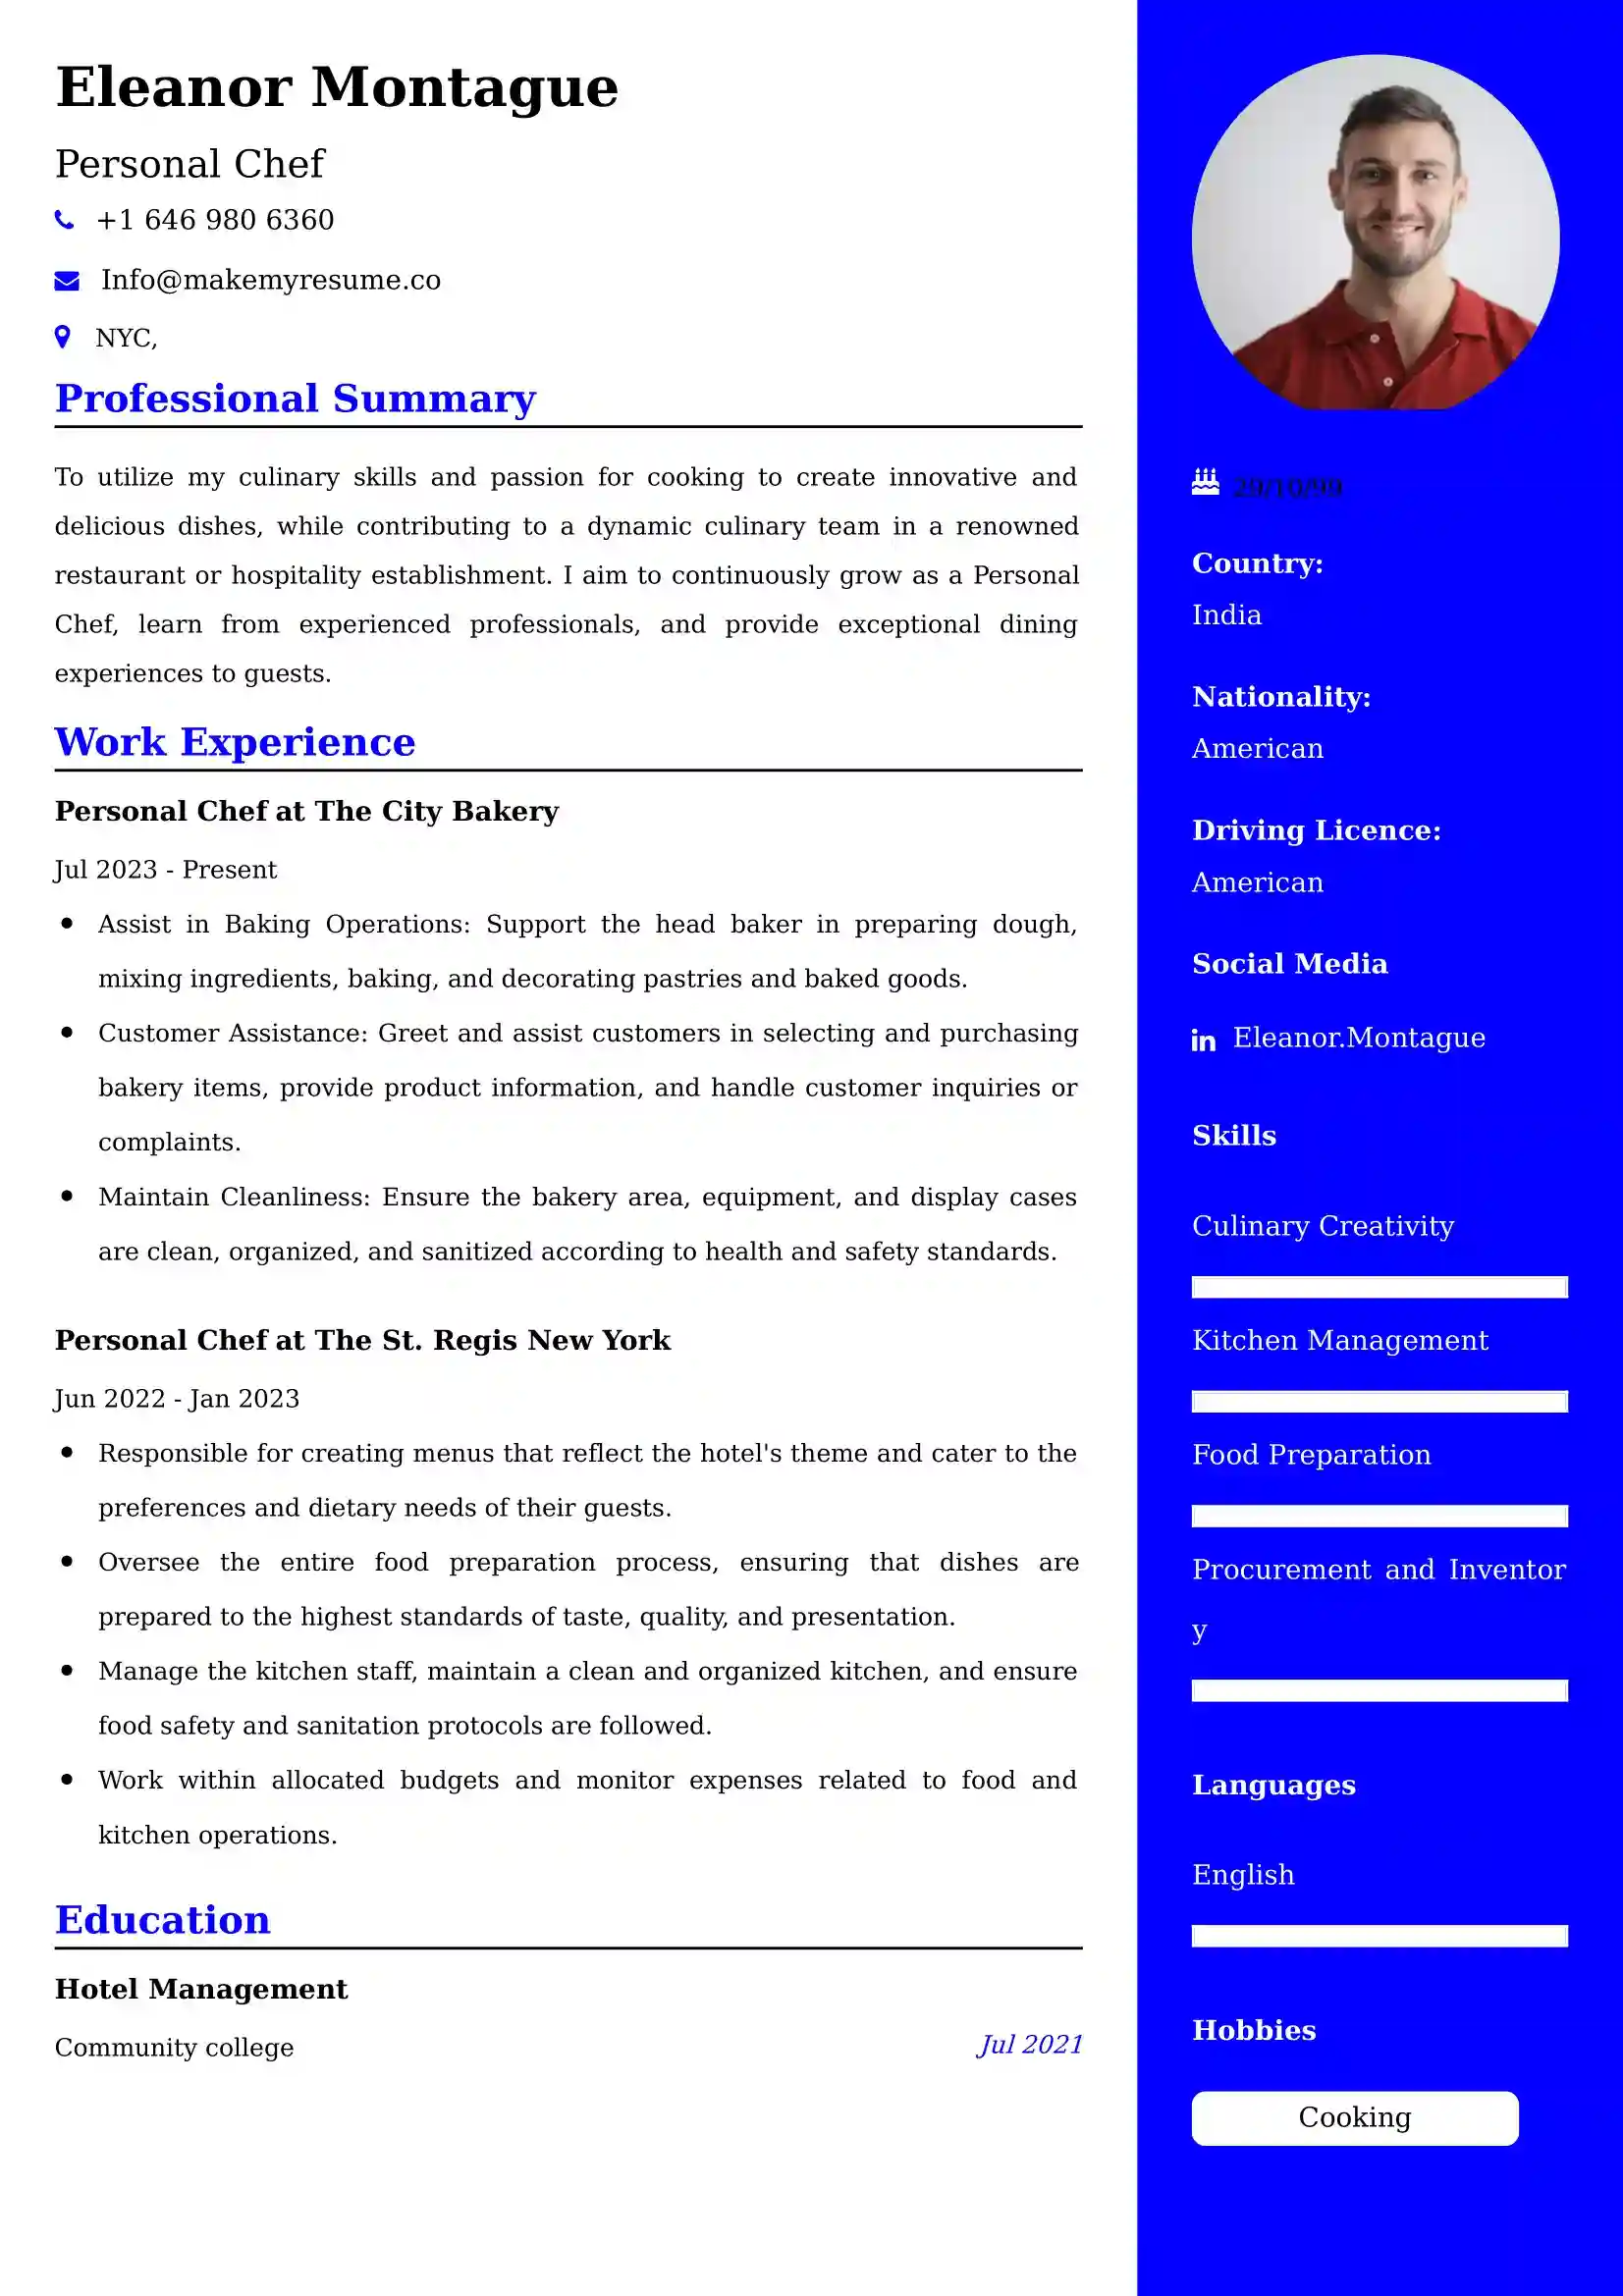 Personal Chef Resume Examples - Australian Format and Tips